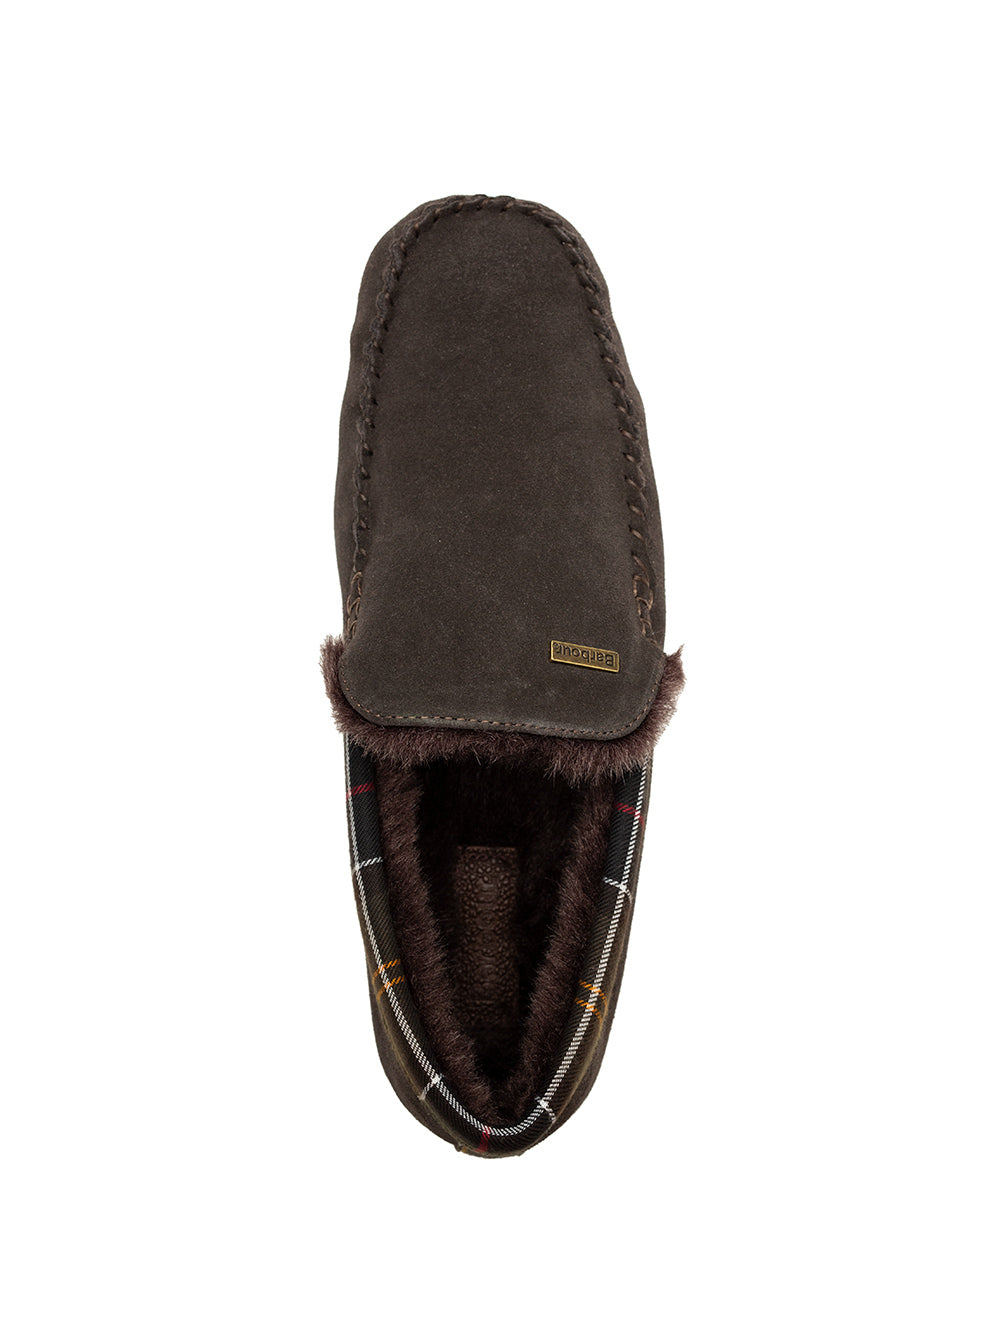 Monty Slippers-Brown